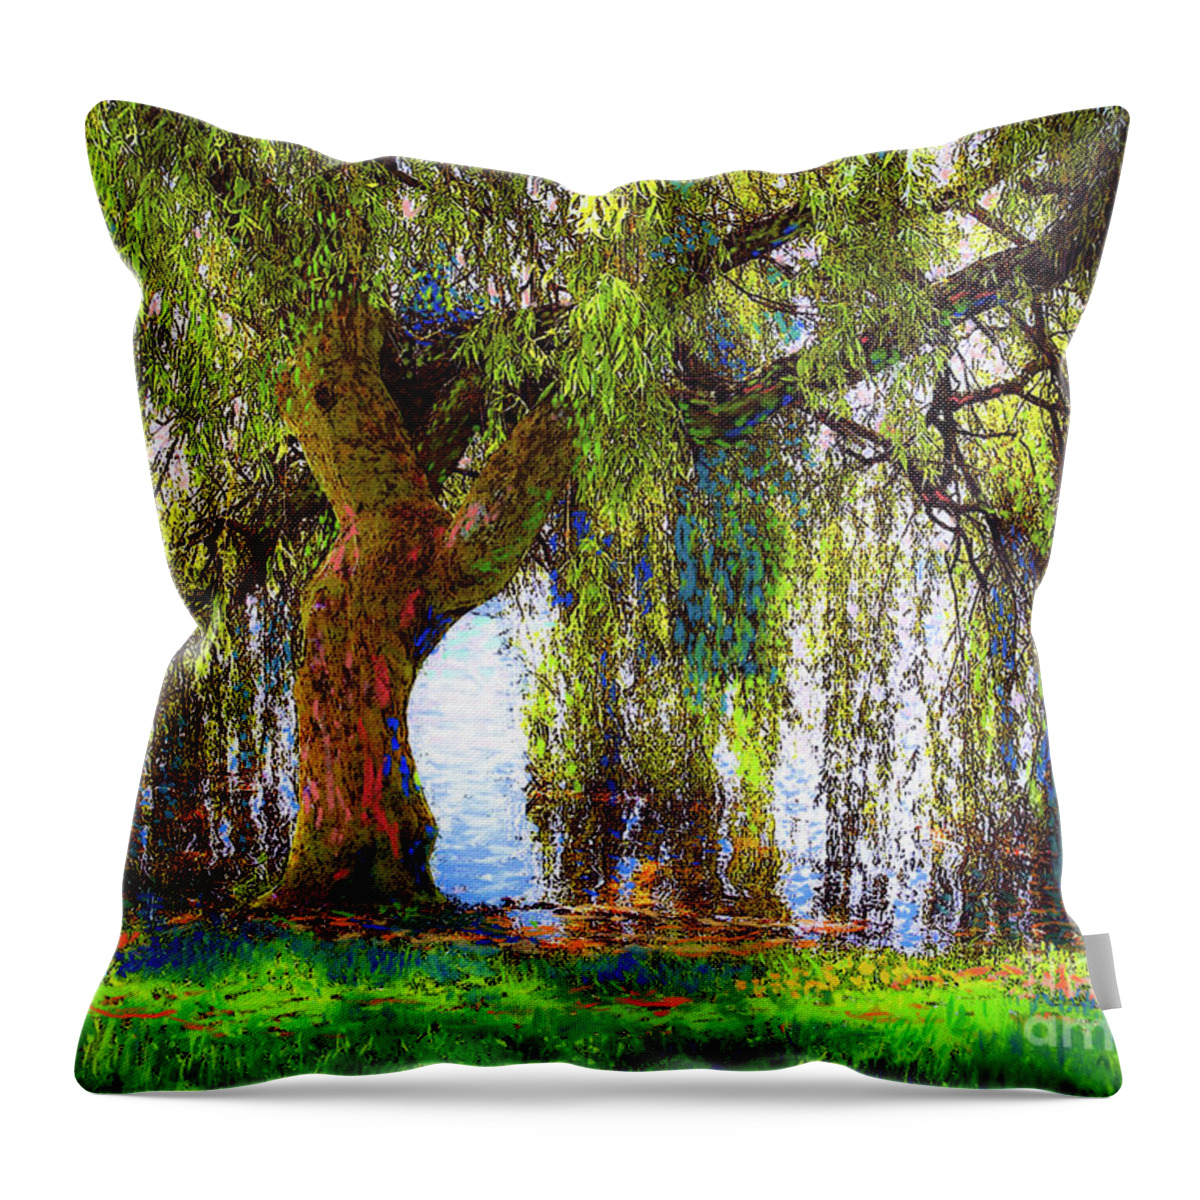 Landscape Throw Pillow featuring the painting Weeping Willow by Jane Small